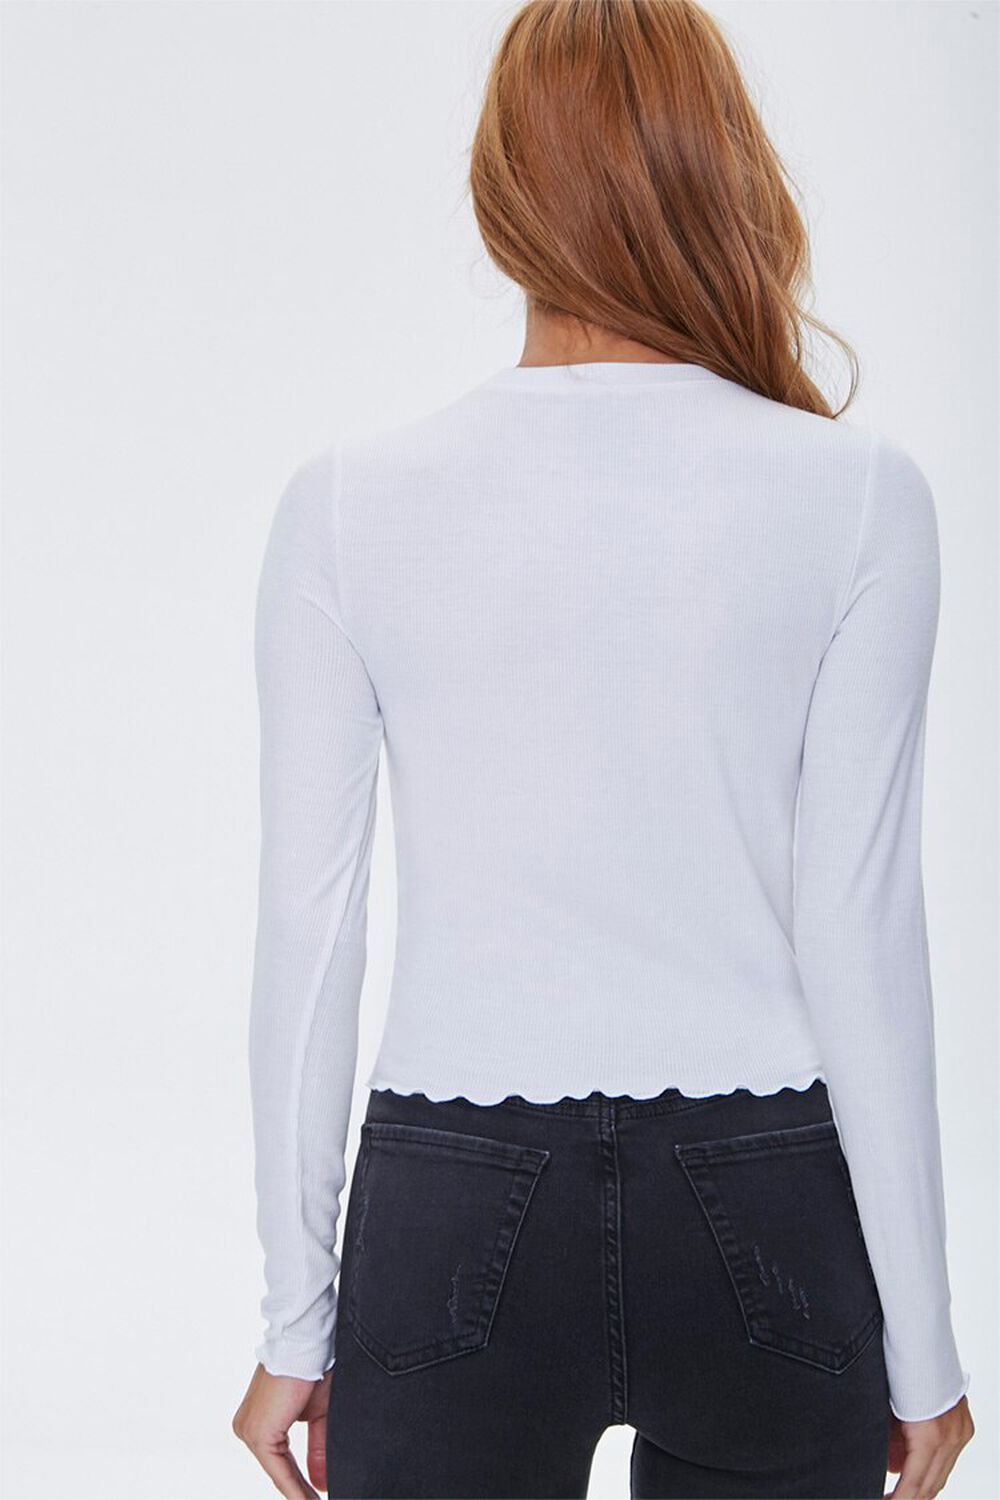 WHITE/BLACK Embroidered Celestial Top, image 3